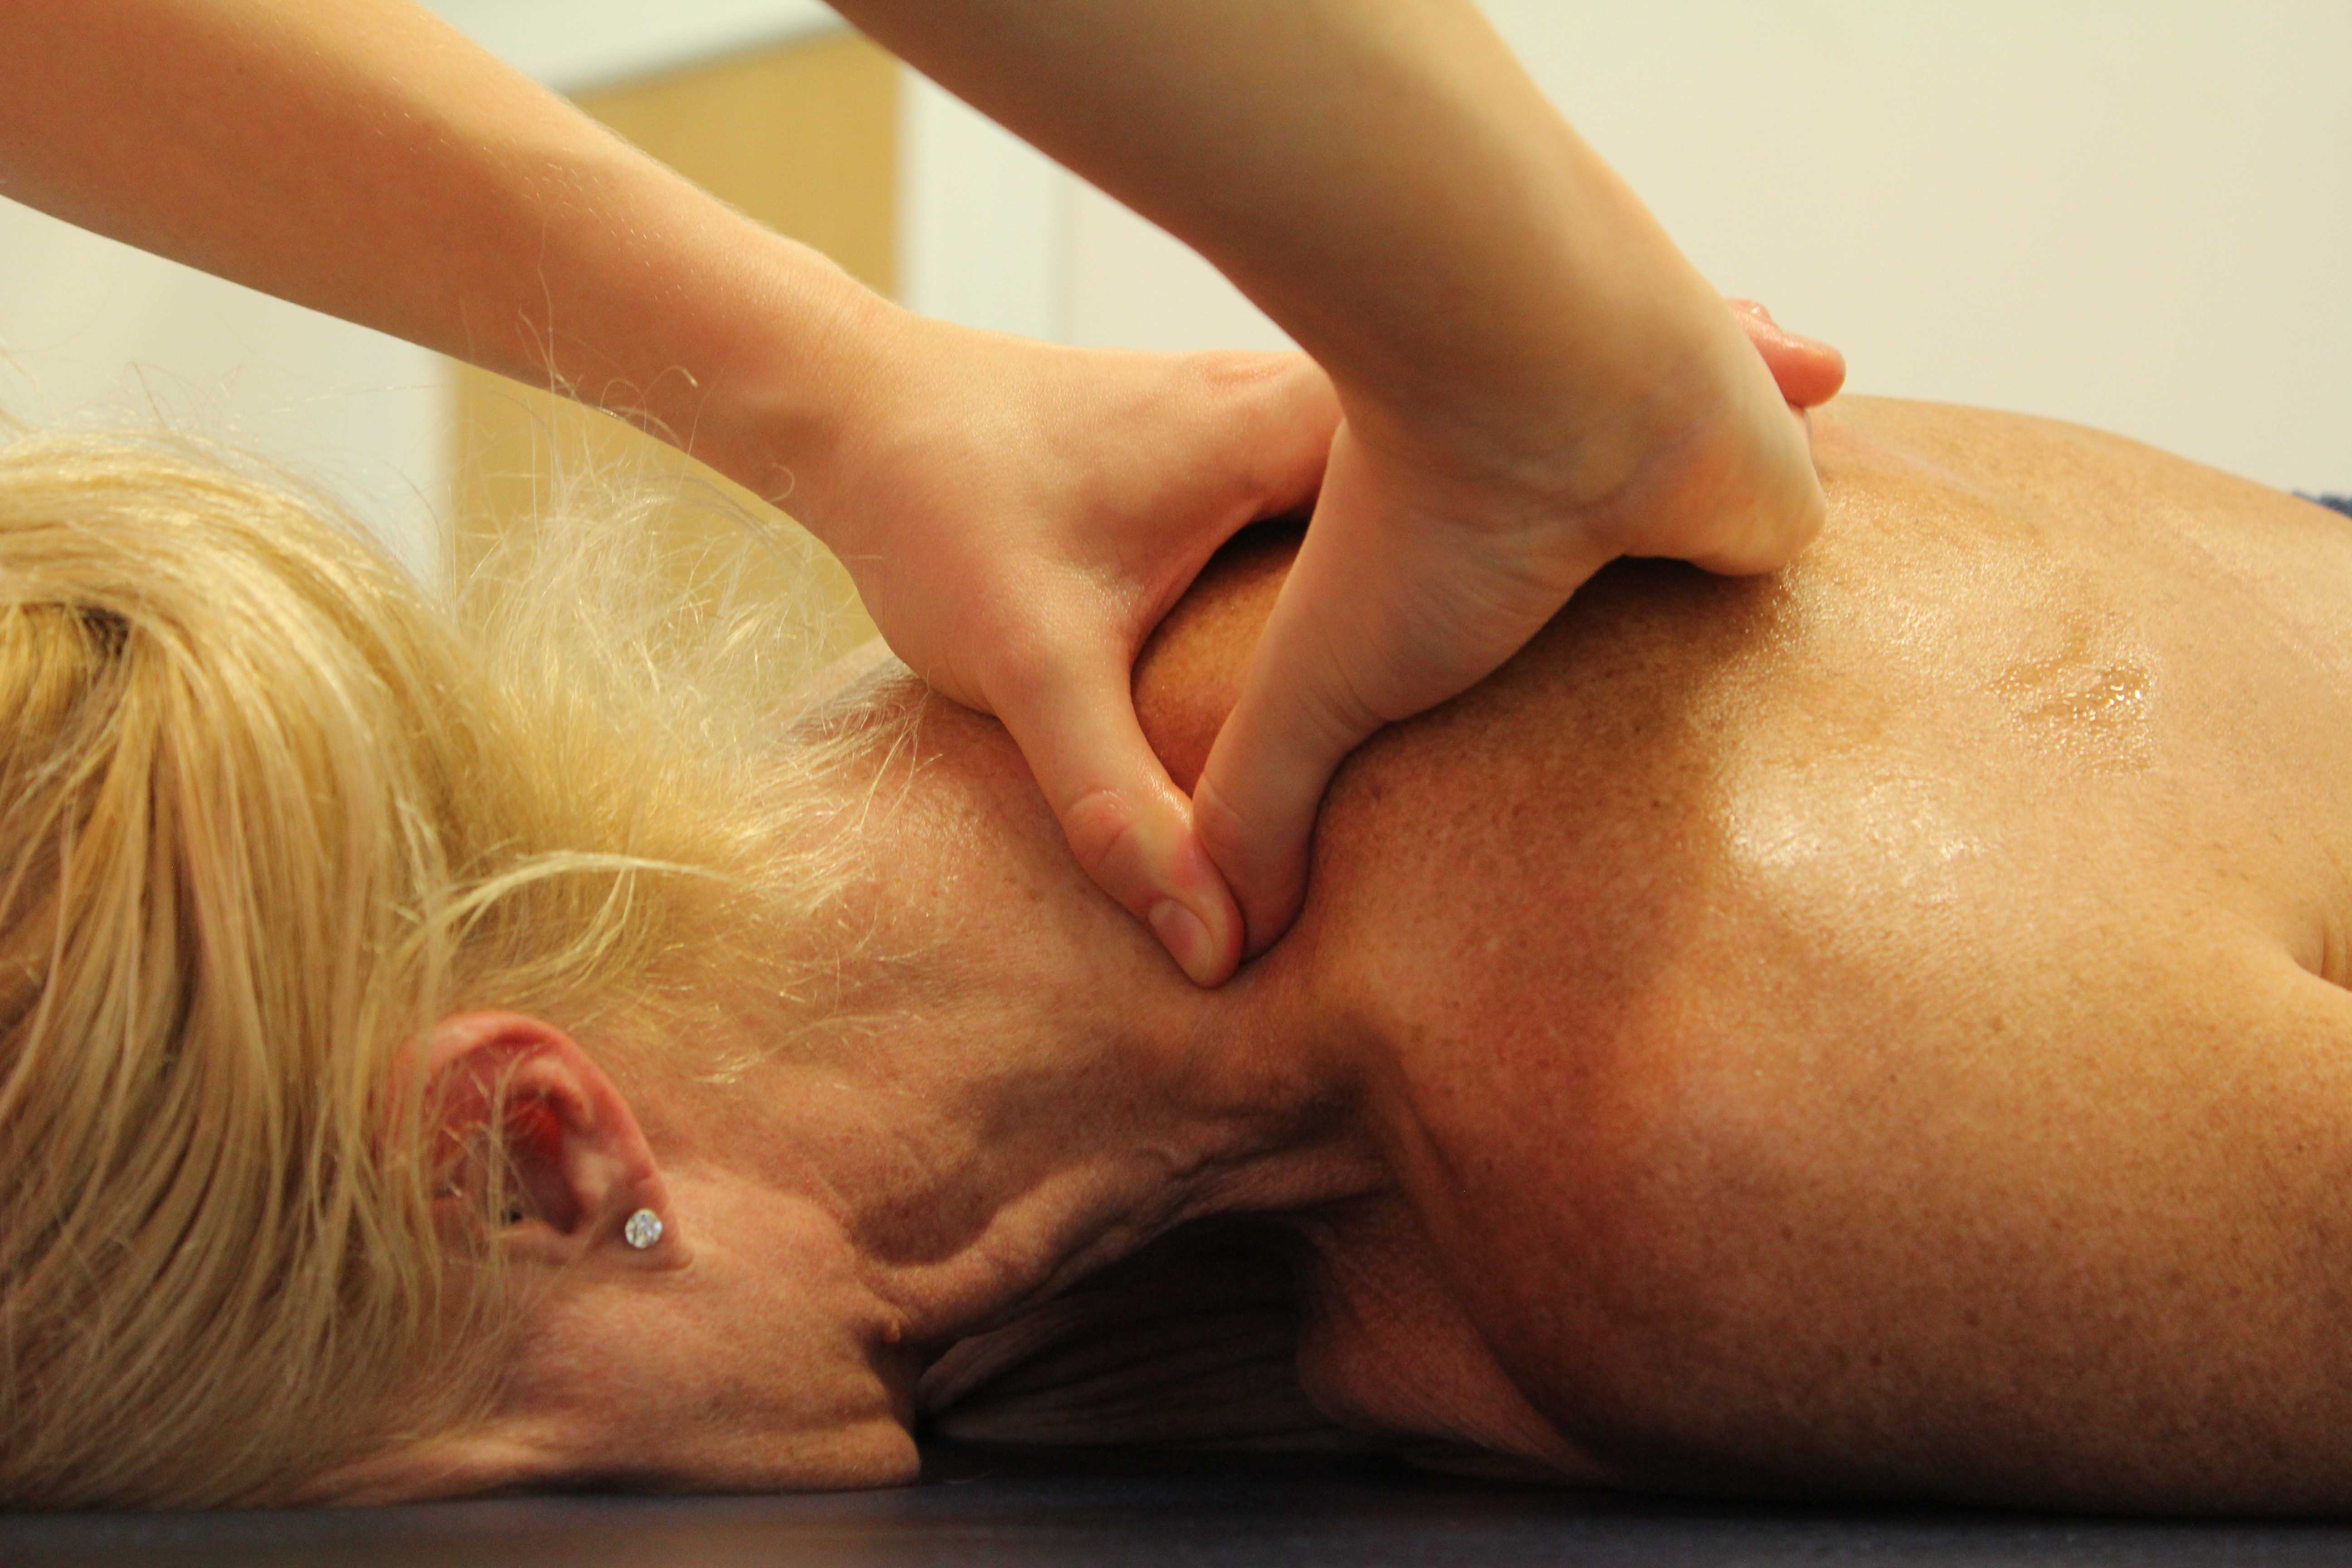 International professional massage and complementary therapies education.